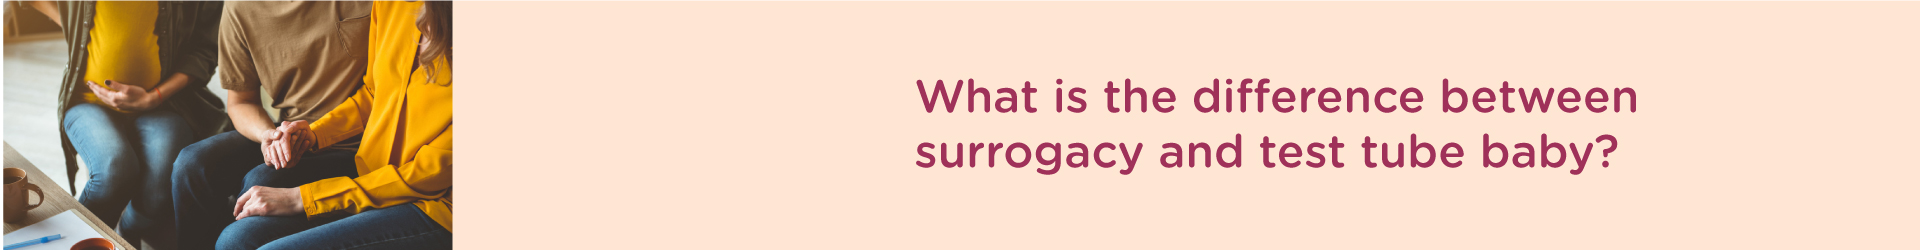  Difference Between Surrogacy and Test Tube Baby?